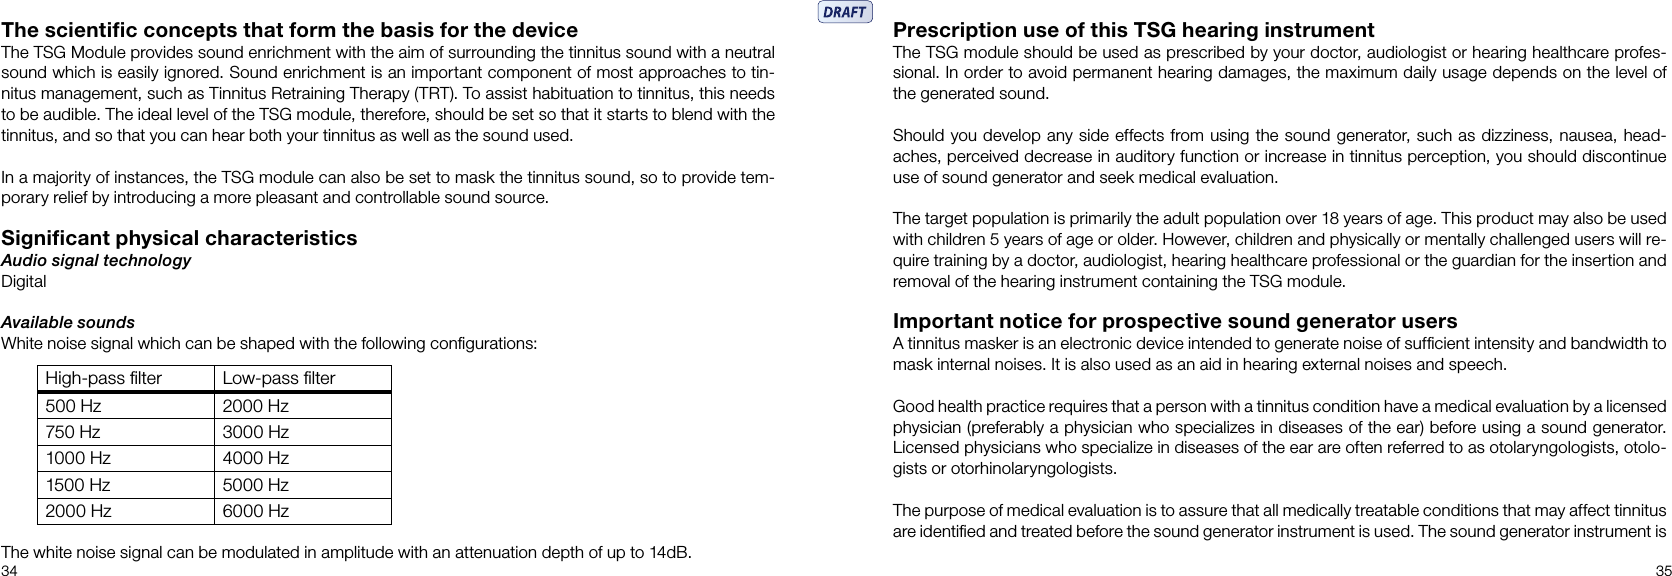 34 35The scientiﬁc concepts that form the basis for the deviceThe TSG Module provides sound enrichment with the aim of surrounding the tinnitus sound with a neutral sound which is easily ignored. Sound enrichment is an important component of most approaches to tin-nitus management, such as Tinnitus Retraining Therapy (TRT). To assist habituation to tinnitus, this needs to be audible. The ideal level of the TSG module, therefore, should be set so that it starts to blend with the tinnitus, and so that you can hear both your tinnitus as well as the sound used.In a majority of instances, the TSG module can also be set to mask the tinnitus sound, so to provide tem-porary relief by introducing a more pleasant and controllable sound source.Signiﬁcant physical characteristicsAudio signal technologyDigitalAvailable soundsWhite noise signal which can be shaped with the following conﬁgurations:The white noise signal can be modulated in amplitude with an attenuation depth of up to 14dB.High-pass ﬁlter Low-pass ﬁlter500 Hz 2000 Hz750 Hz 3000 Hz1000 Hz 4000 Hz1500 Hz 5000 Hz2000 Hz 6000 HzPrescription use of this TSG hearing instrumentThe TSG module should be used as prescribed by your doctor, audiologist or hearing healthcare profes-sional. In order to avoid permanent hearing damages, the maximum daily usage depends on the level of the generated sound.Should you develop any side effects from using the sound generator, such as dizziness, nausea, head-aches, perceived decrease in auditory function or increase in tinnitus perception, you should discontinue use of sound generator and seek medical evaluation.The target population is primarily the adult population over 18 years of age. This product may also be used with children 5 years of age or older. However, children and physically or mentally challenged users will re-quire training by a doctor, audiologist, hearing healthcare professional or the guardian for the insertion and removal of the hearing instrument containing the TSG module.Important notice for prospective sound generator usersA tinnitus masker is an electronic device intended to generate noise of sufﬁcient intensity and bandwidth to mask internal noises. It is also used as an aid in hearing external noises and speech.Good health practice requires that a person with a tinnitus condition have a medical evaluation by a licensed physician (preferably a physician who specializes in diseases of the ear) before using a sound generator.Licensed physicians who specialize in diseases of the ear are often referred to as otolaryngologists, otolo-gists or otorhinolaryngologists. The purpose of medical evaluation is to assure that all medically treatable conditions that may affect tinnitus are identiﬁed and treated before the sound generator instrument is used. The sound generator instrument is 